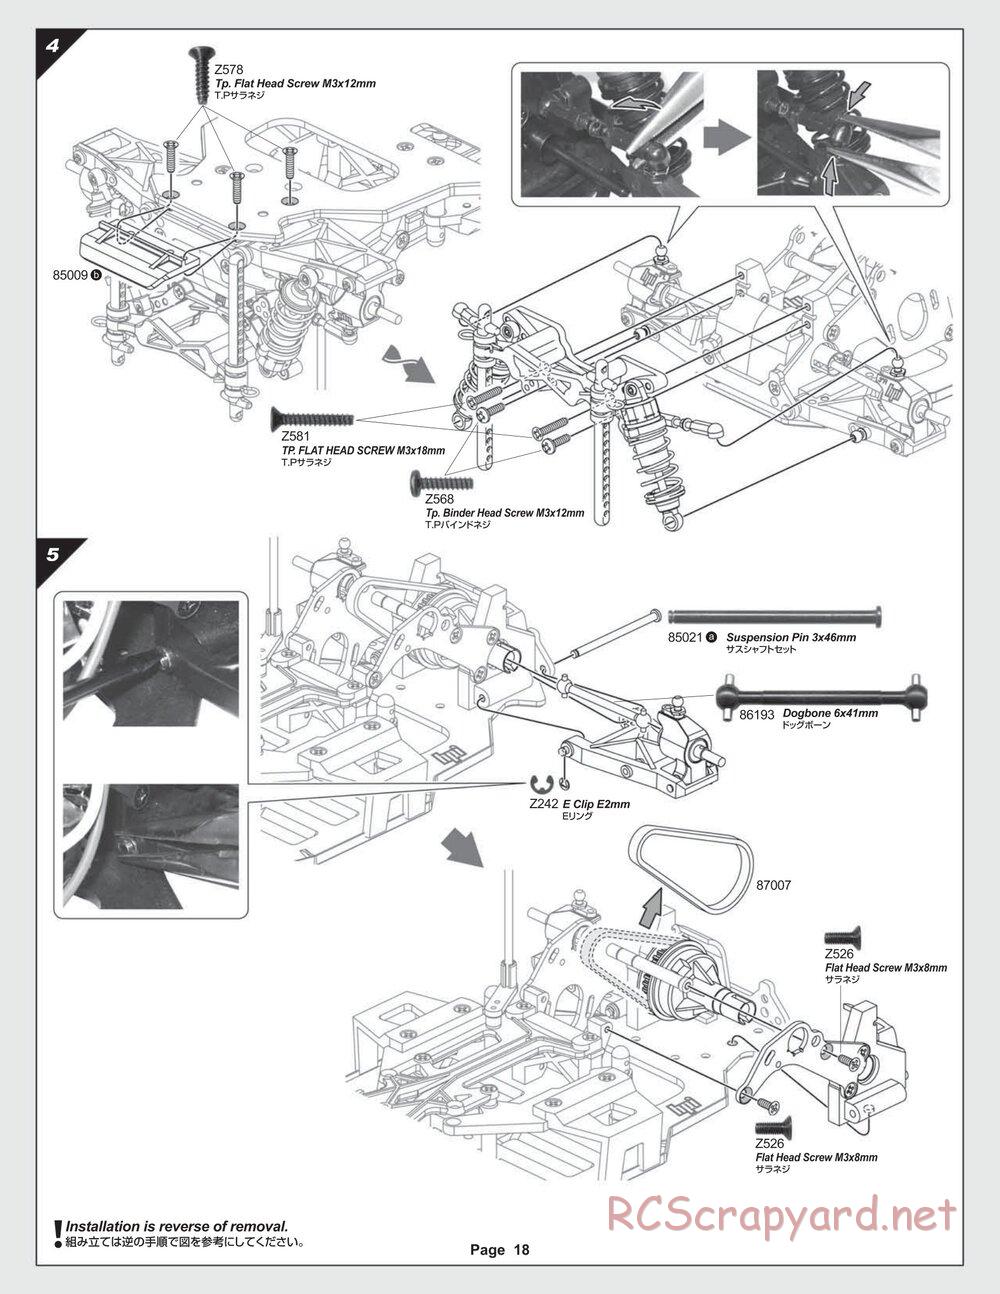 HPI - Sprint 2 RTR - Manual - Page 18